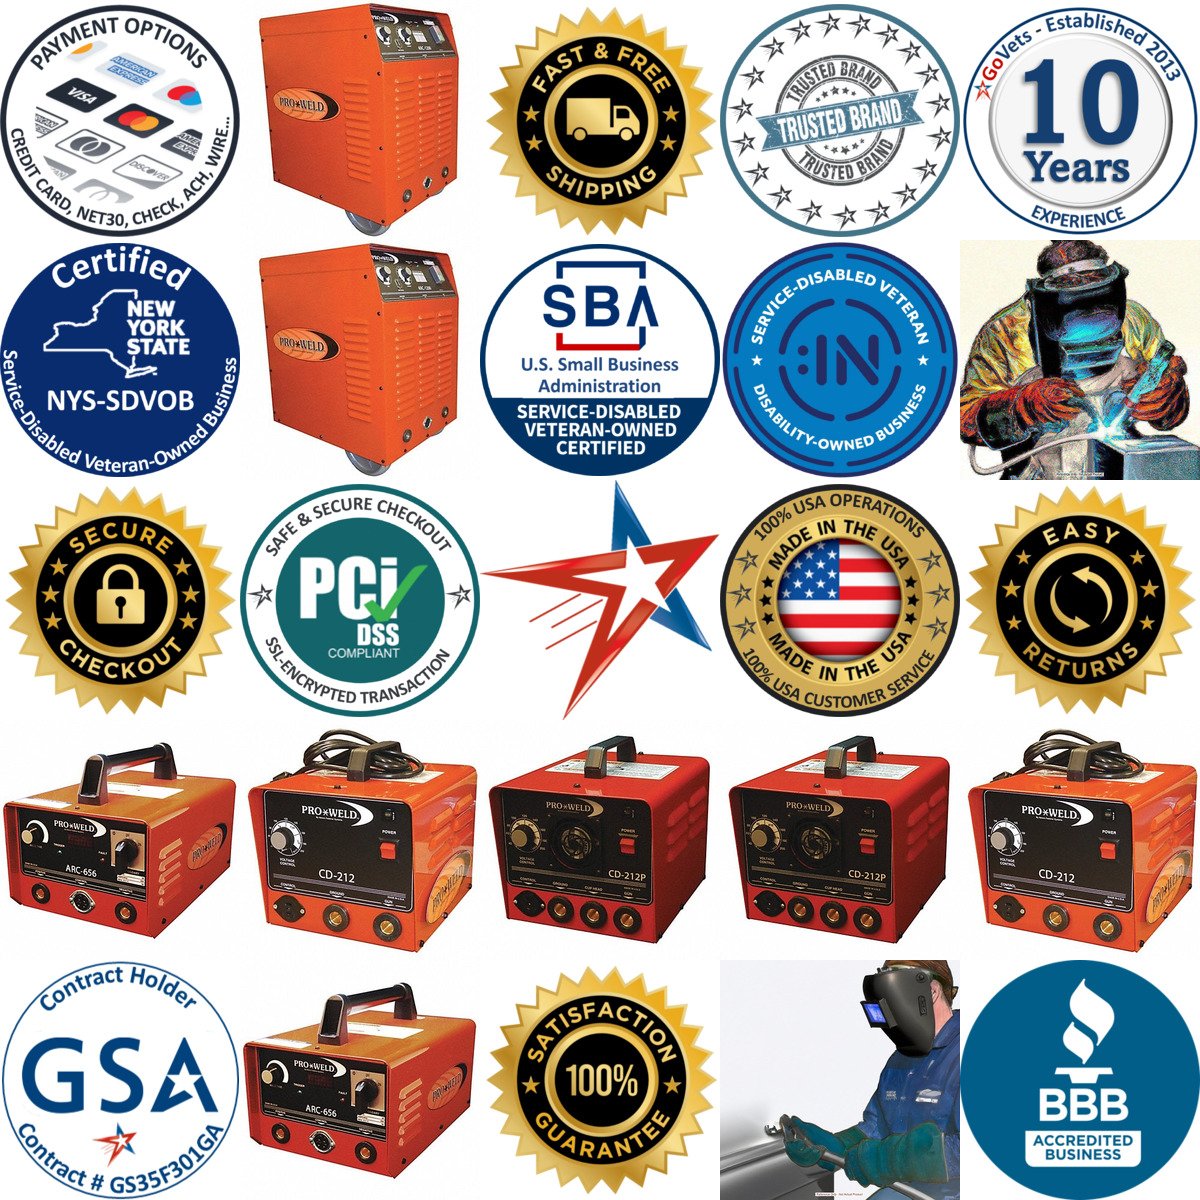 A selection of Stud Welders products on GoVets